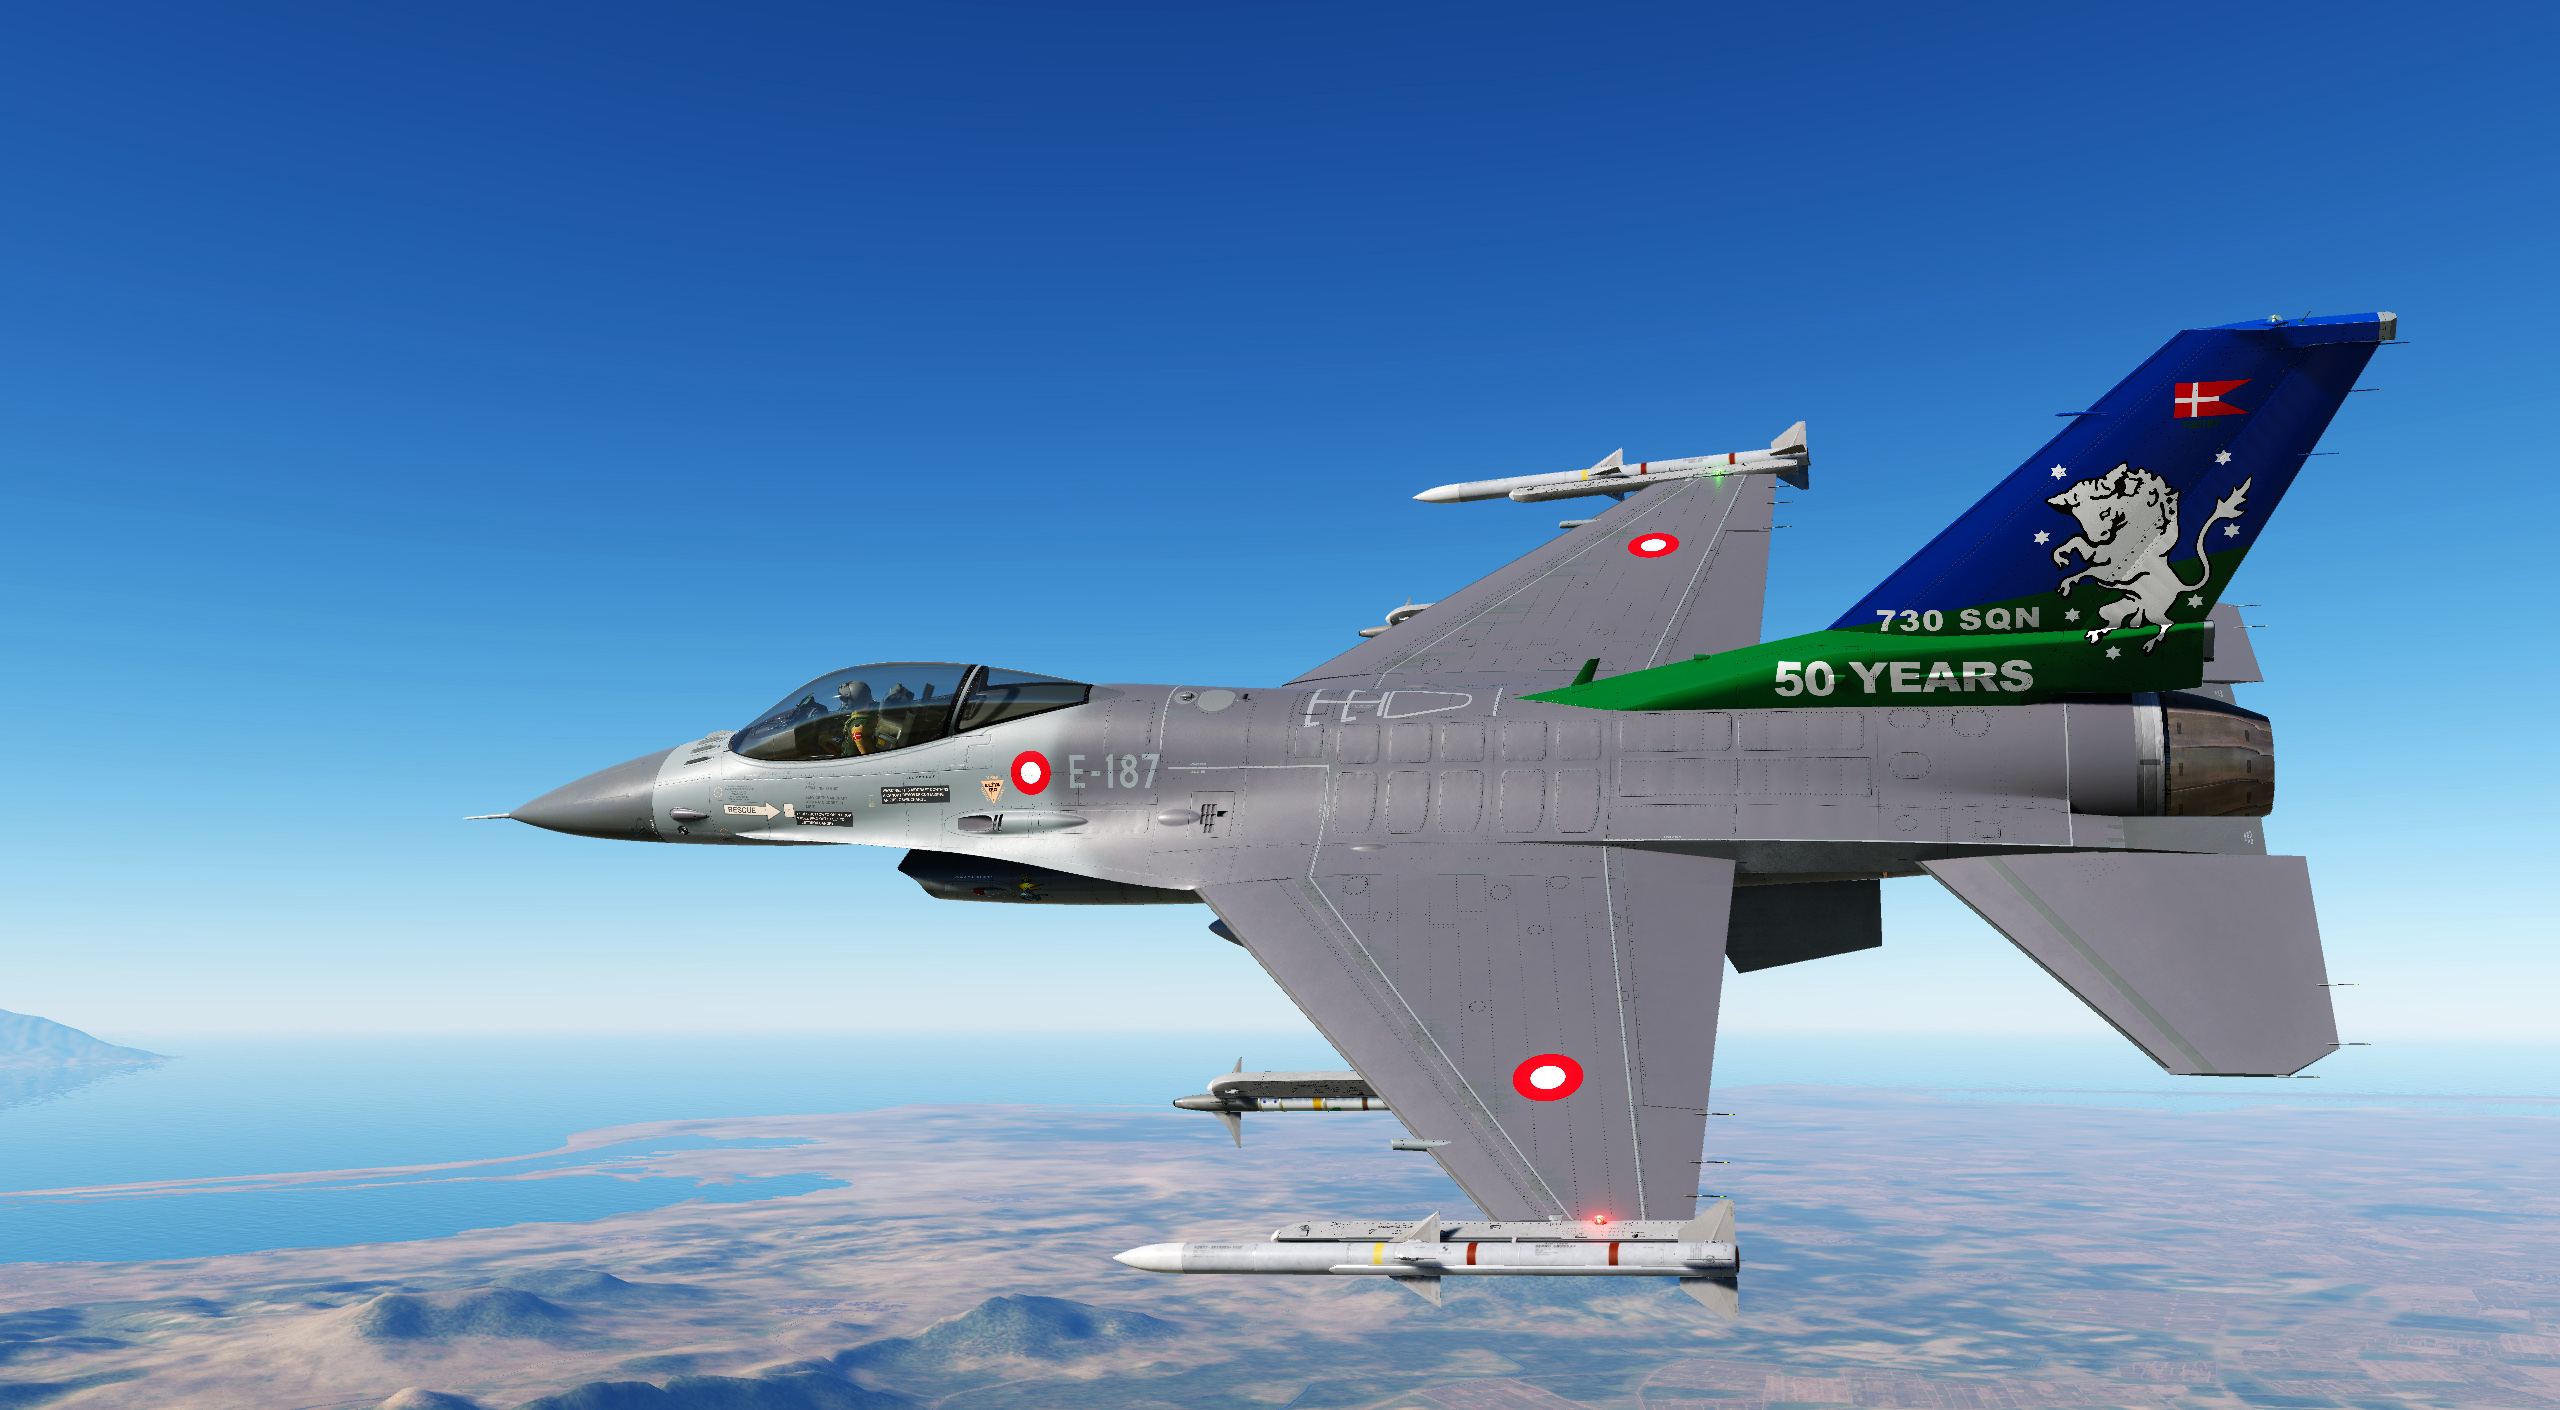 RDAF F-16A Fighting Falcon E-187 730 Fighter Squadron 50 years